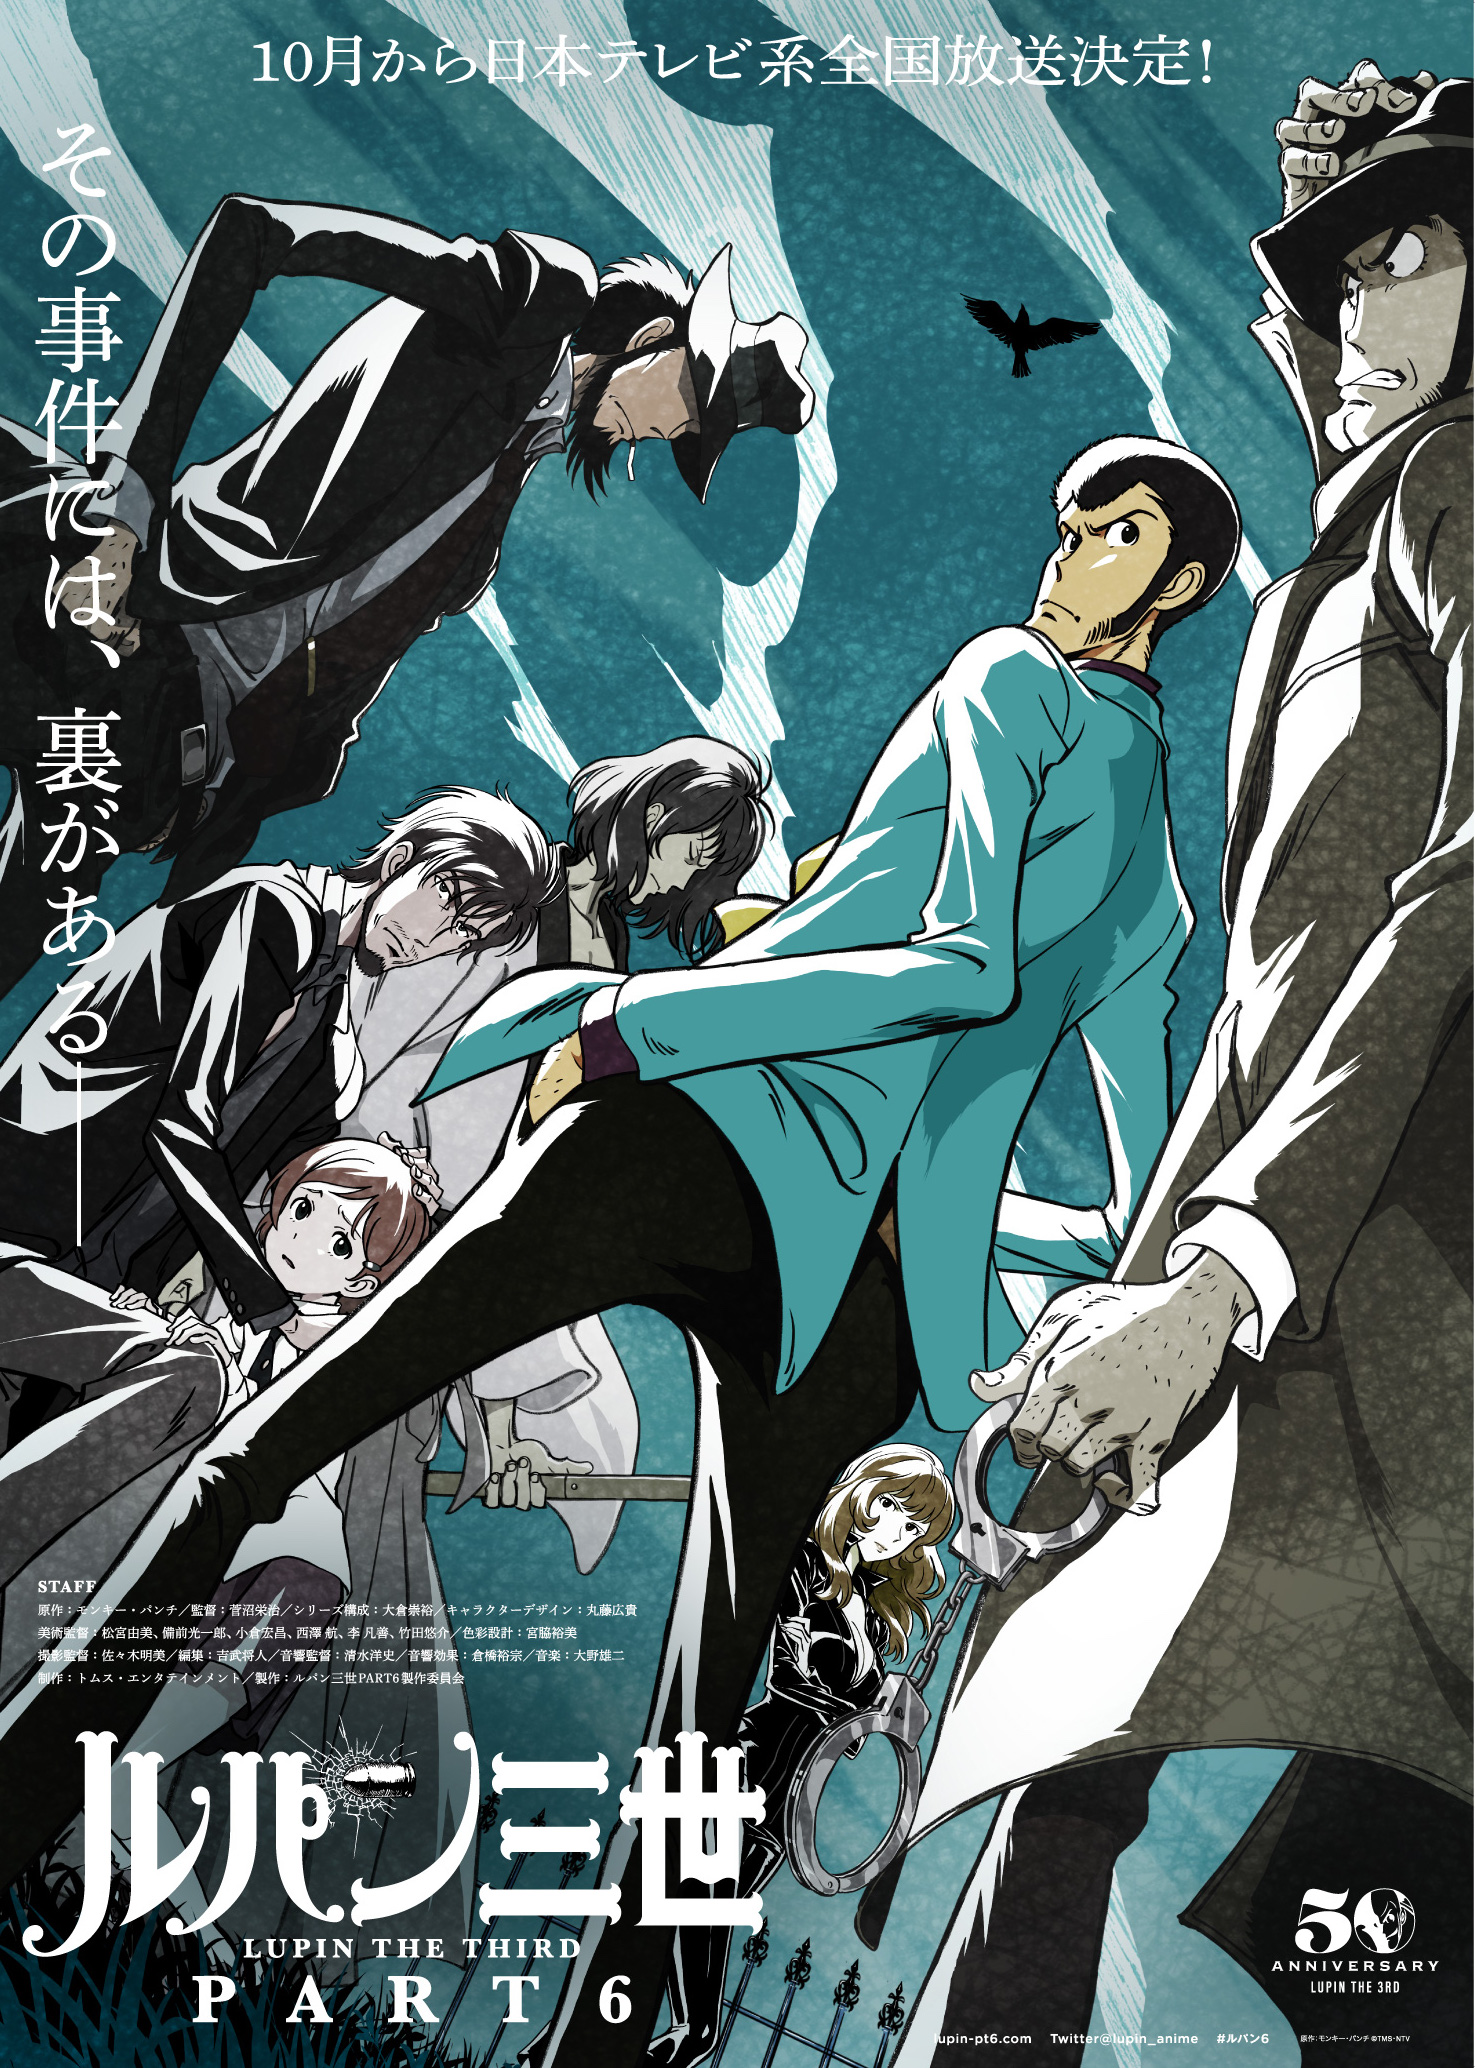 lupin-the-third-part6-kv Lupin III: Part 6 (LUPIN THE 3rd PART 6)